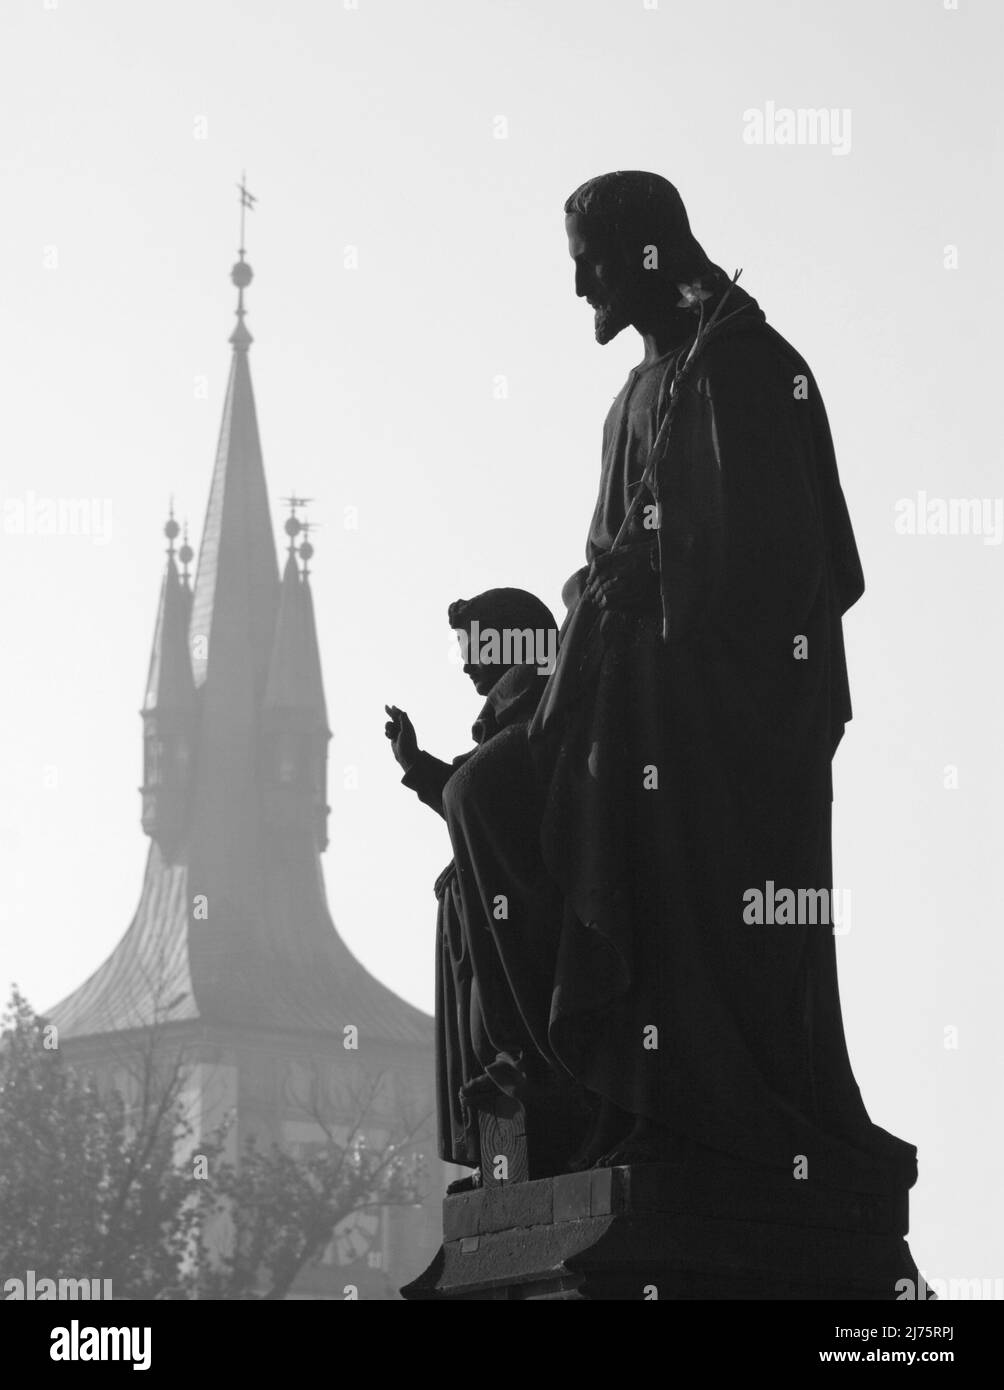 The silhouette of statue of St. Joseph from Charles bridge in Prague by Josef Max originally from year 1706 current statue 1854. Stock Photo